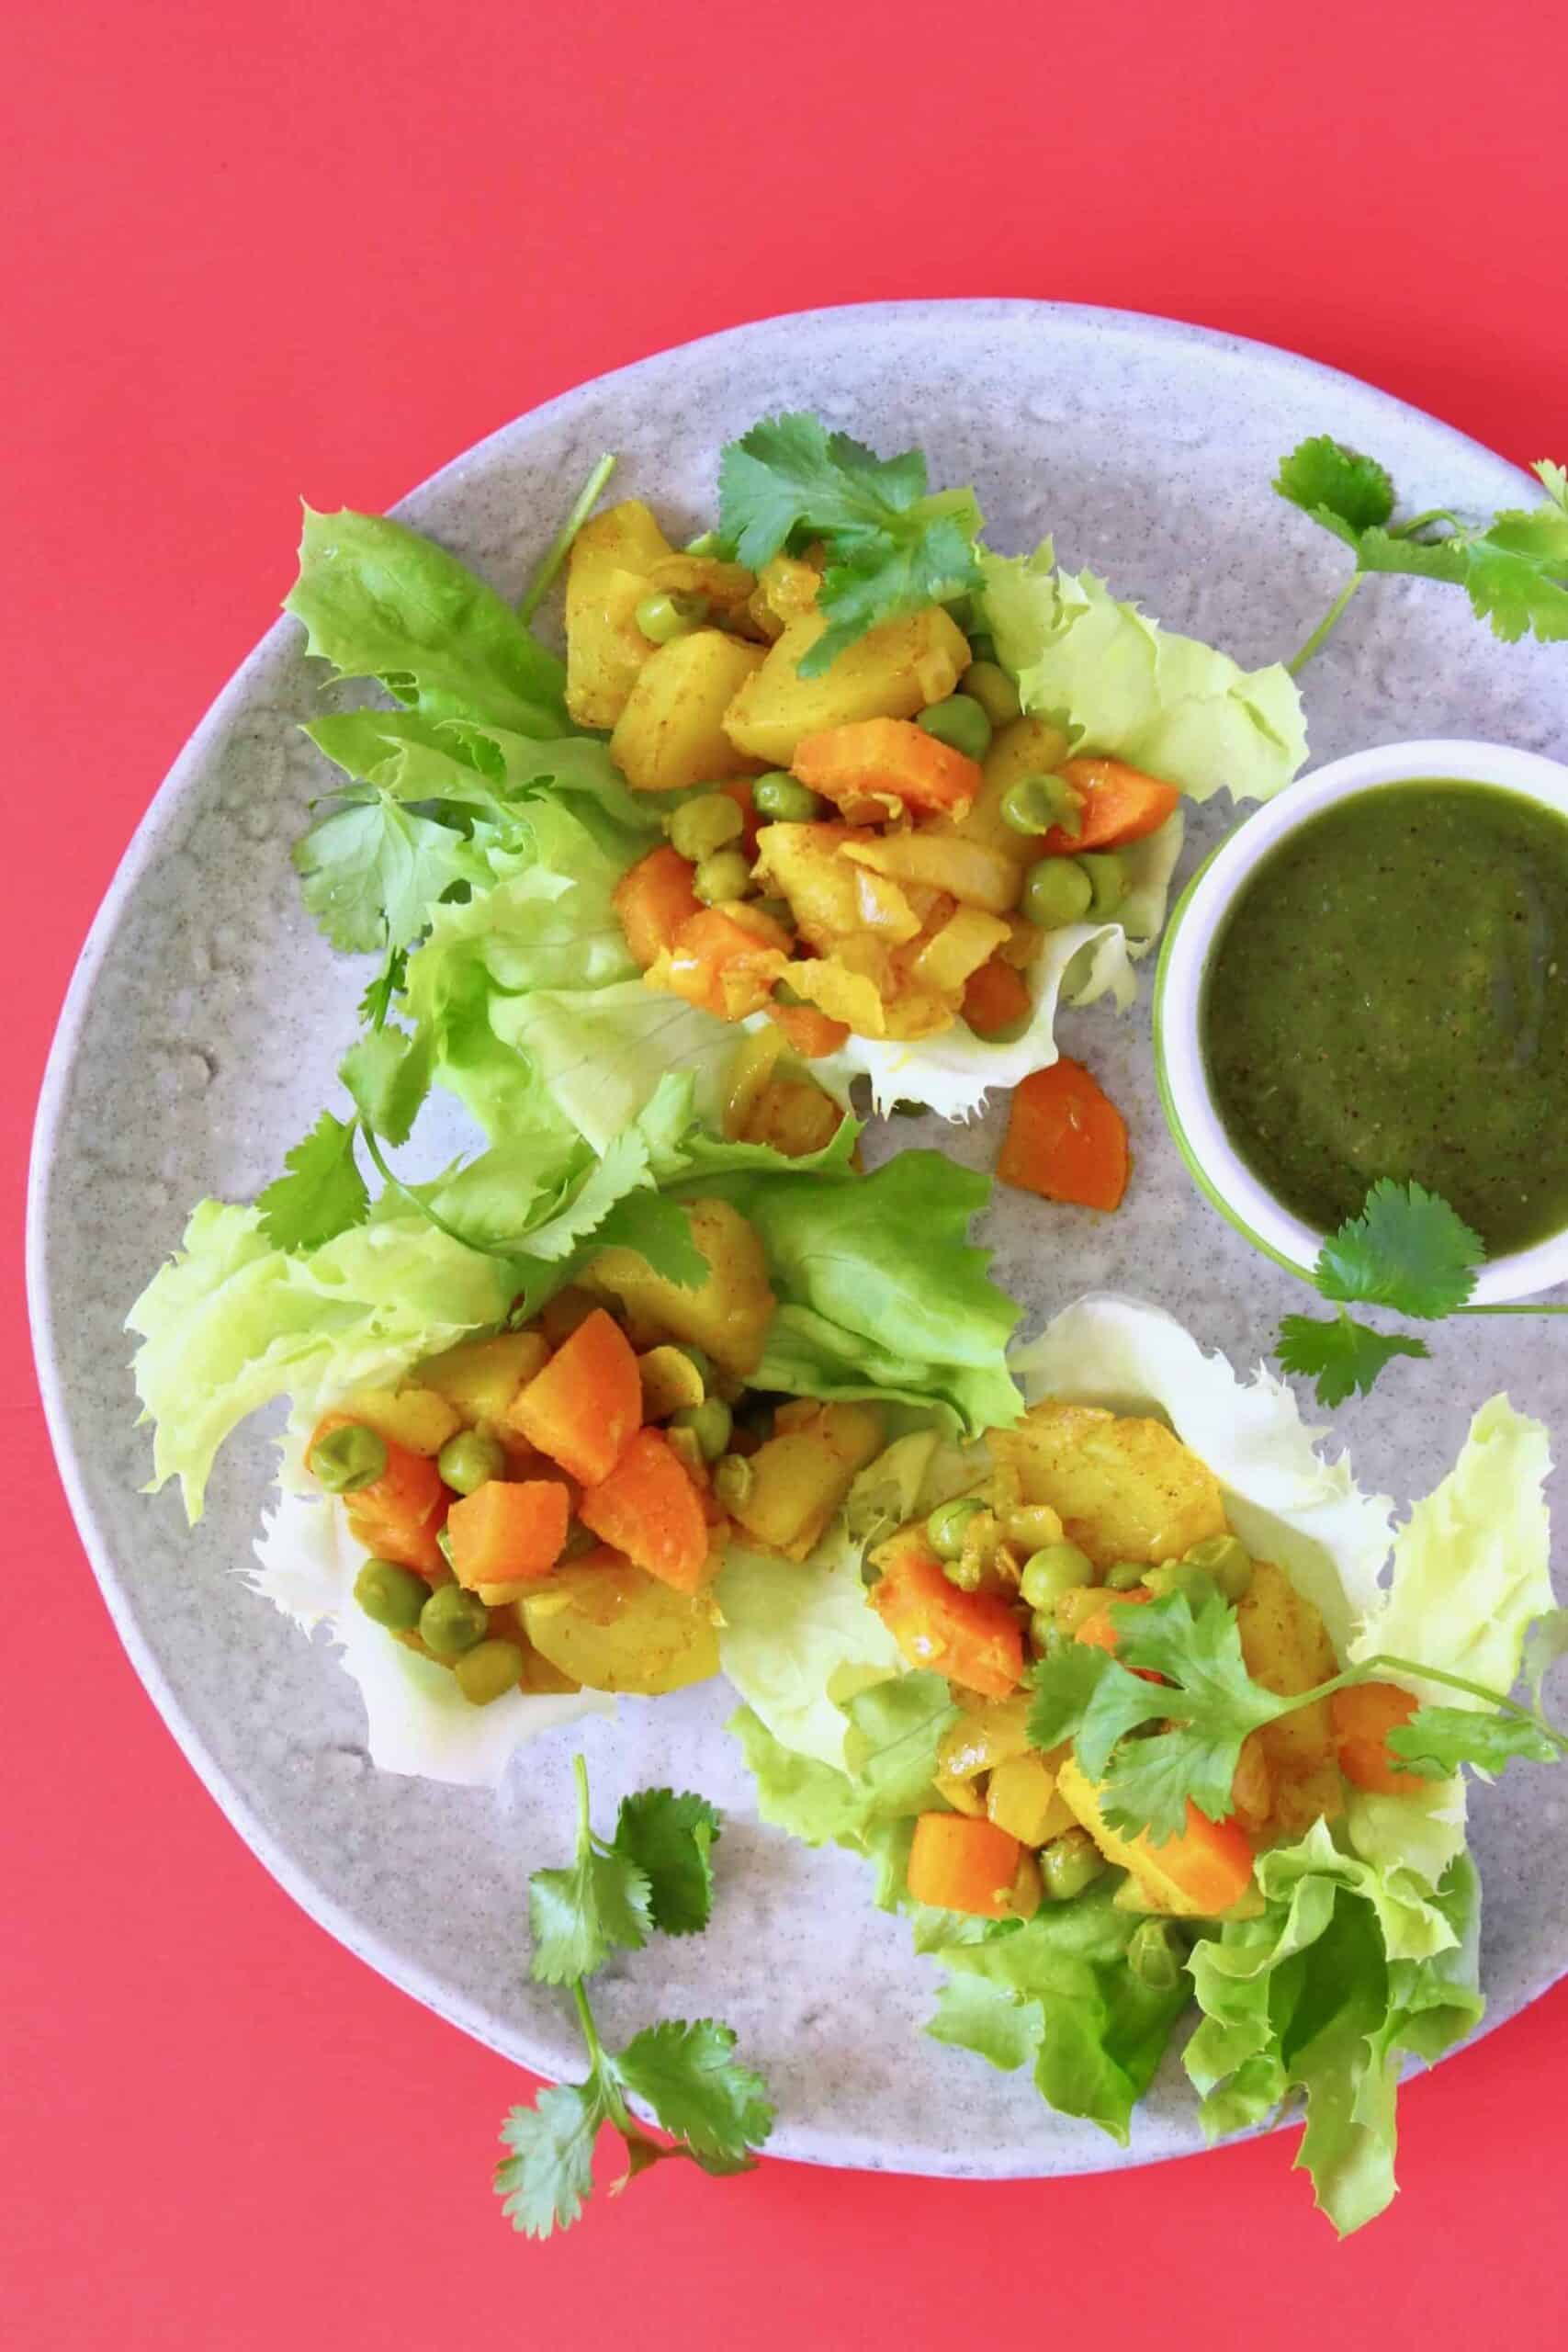 Three lettuce cups filled with curried potato, carrots and green peas on a grey plate with a pot of green chutney against a bright pink background